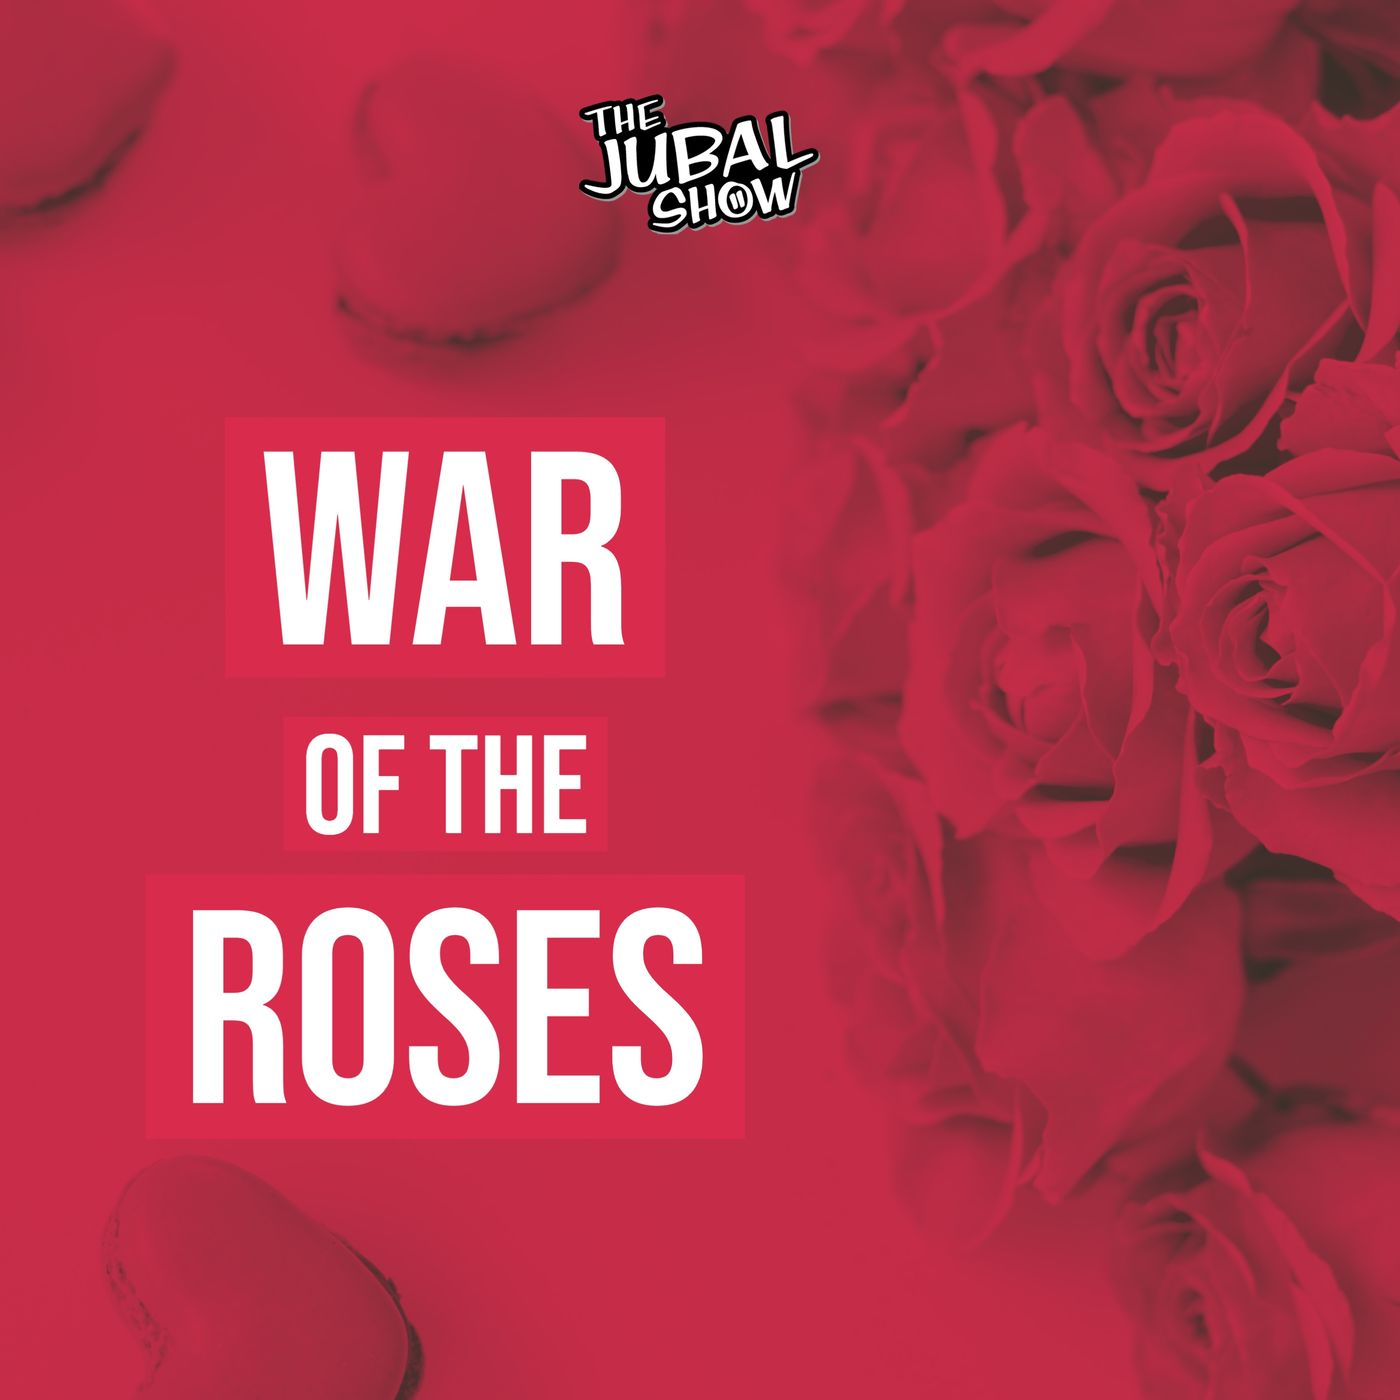 Always pay attention to your gas tank in this War of the Roses!